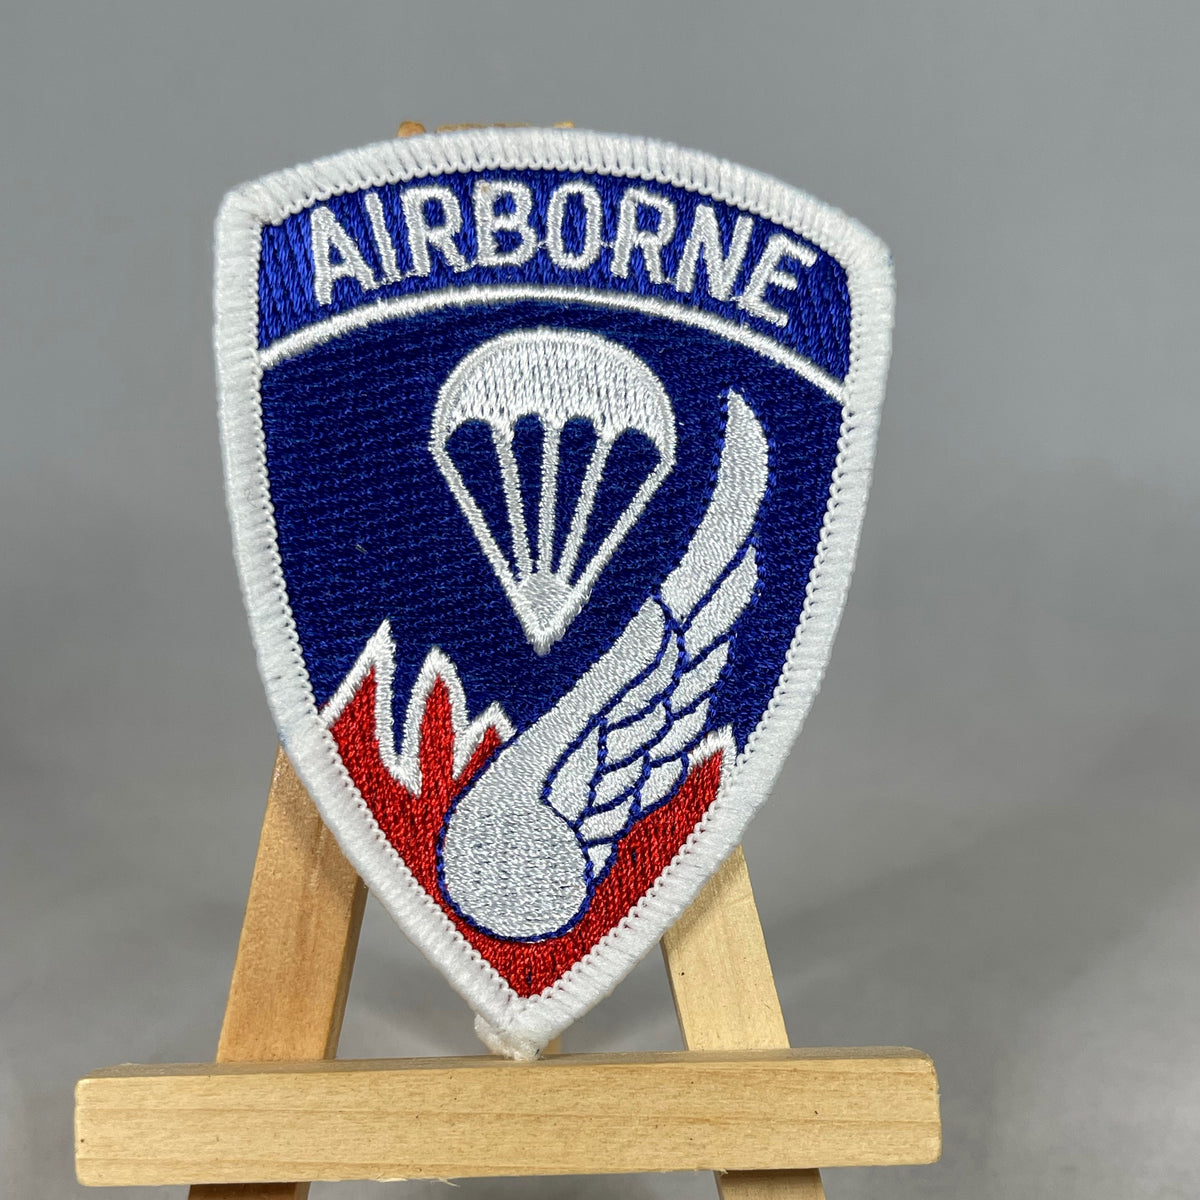 187th Airborne Division Patch